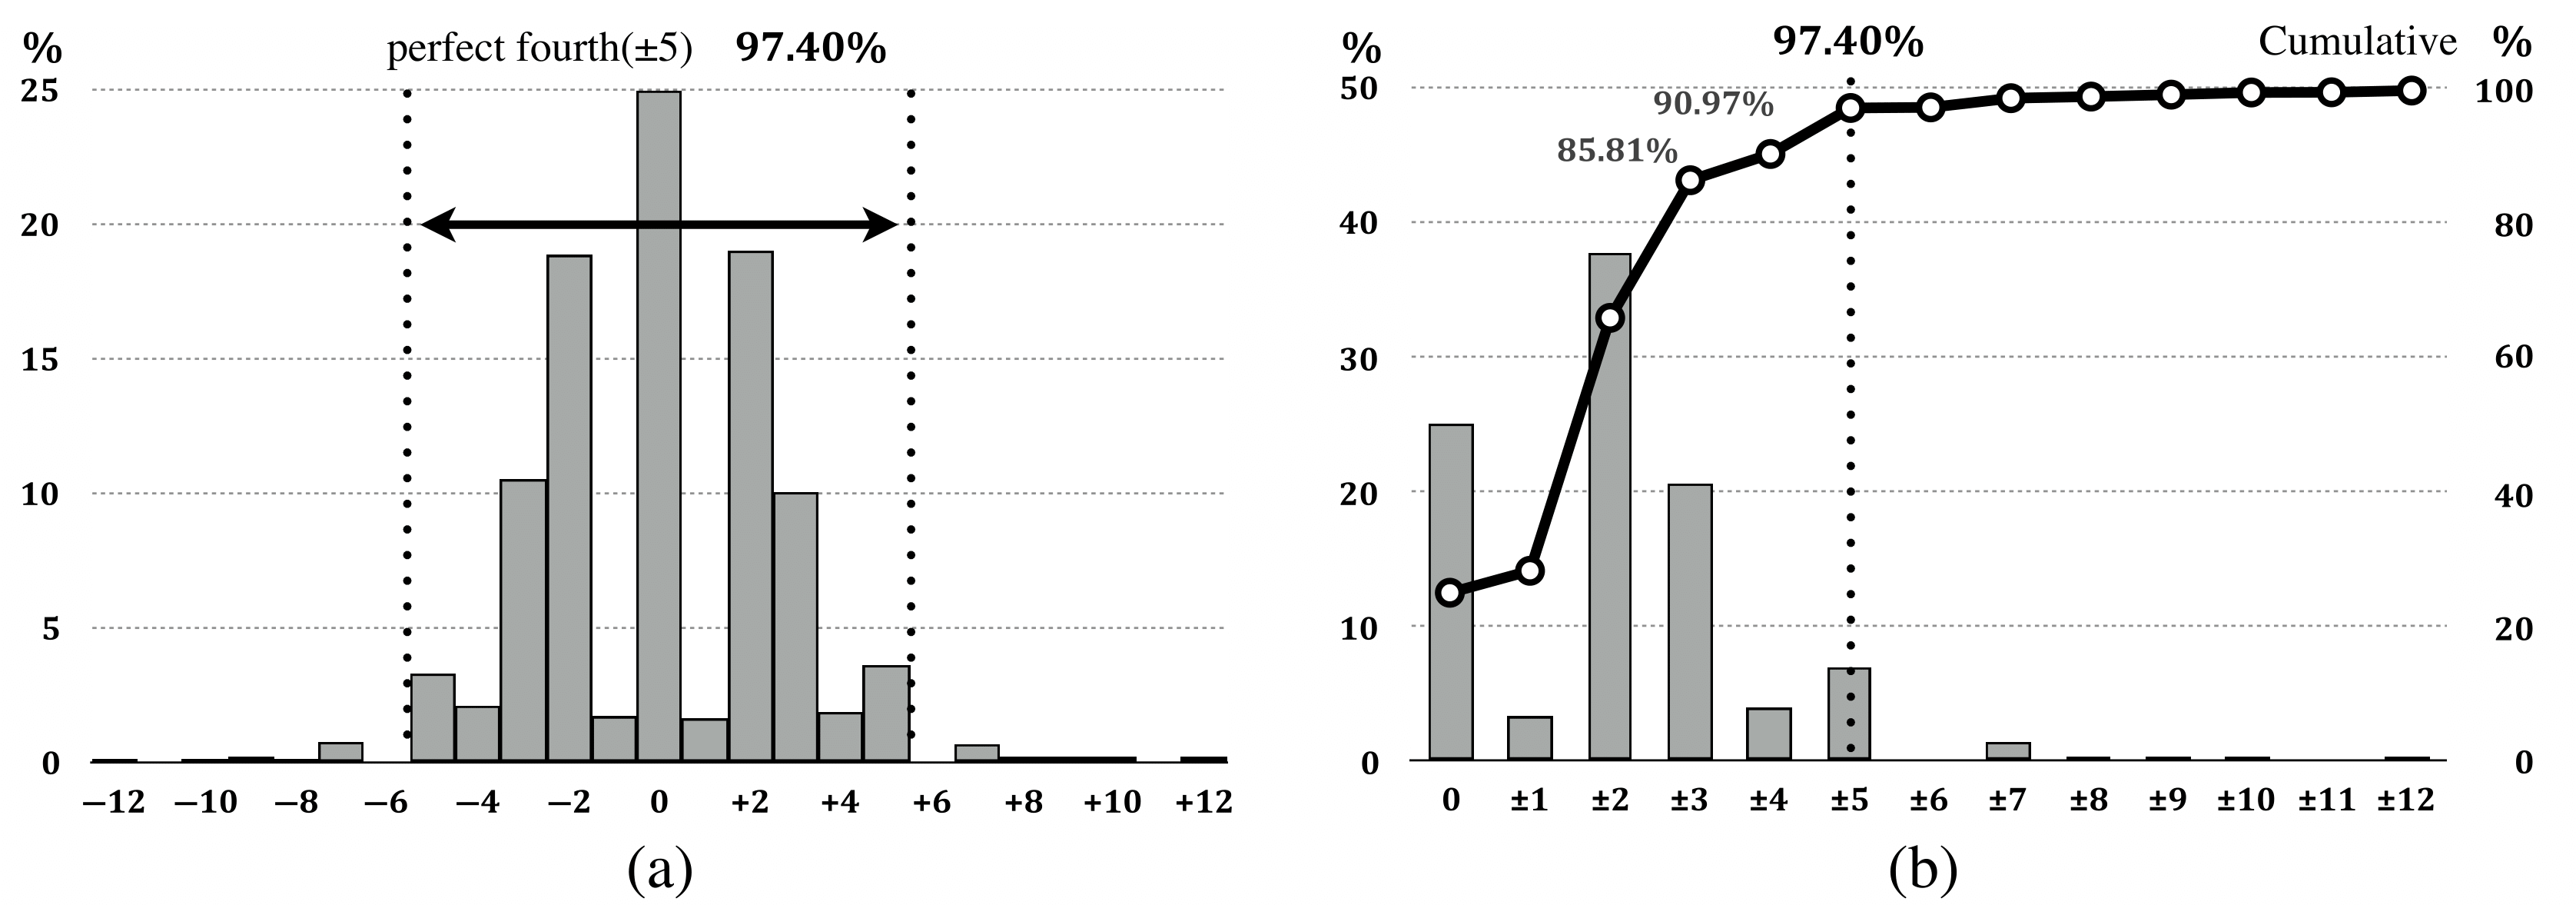 Figure 2: (a) First Transition Frequency and (b) Cumulative Relative Frequency Diagram